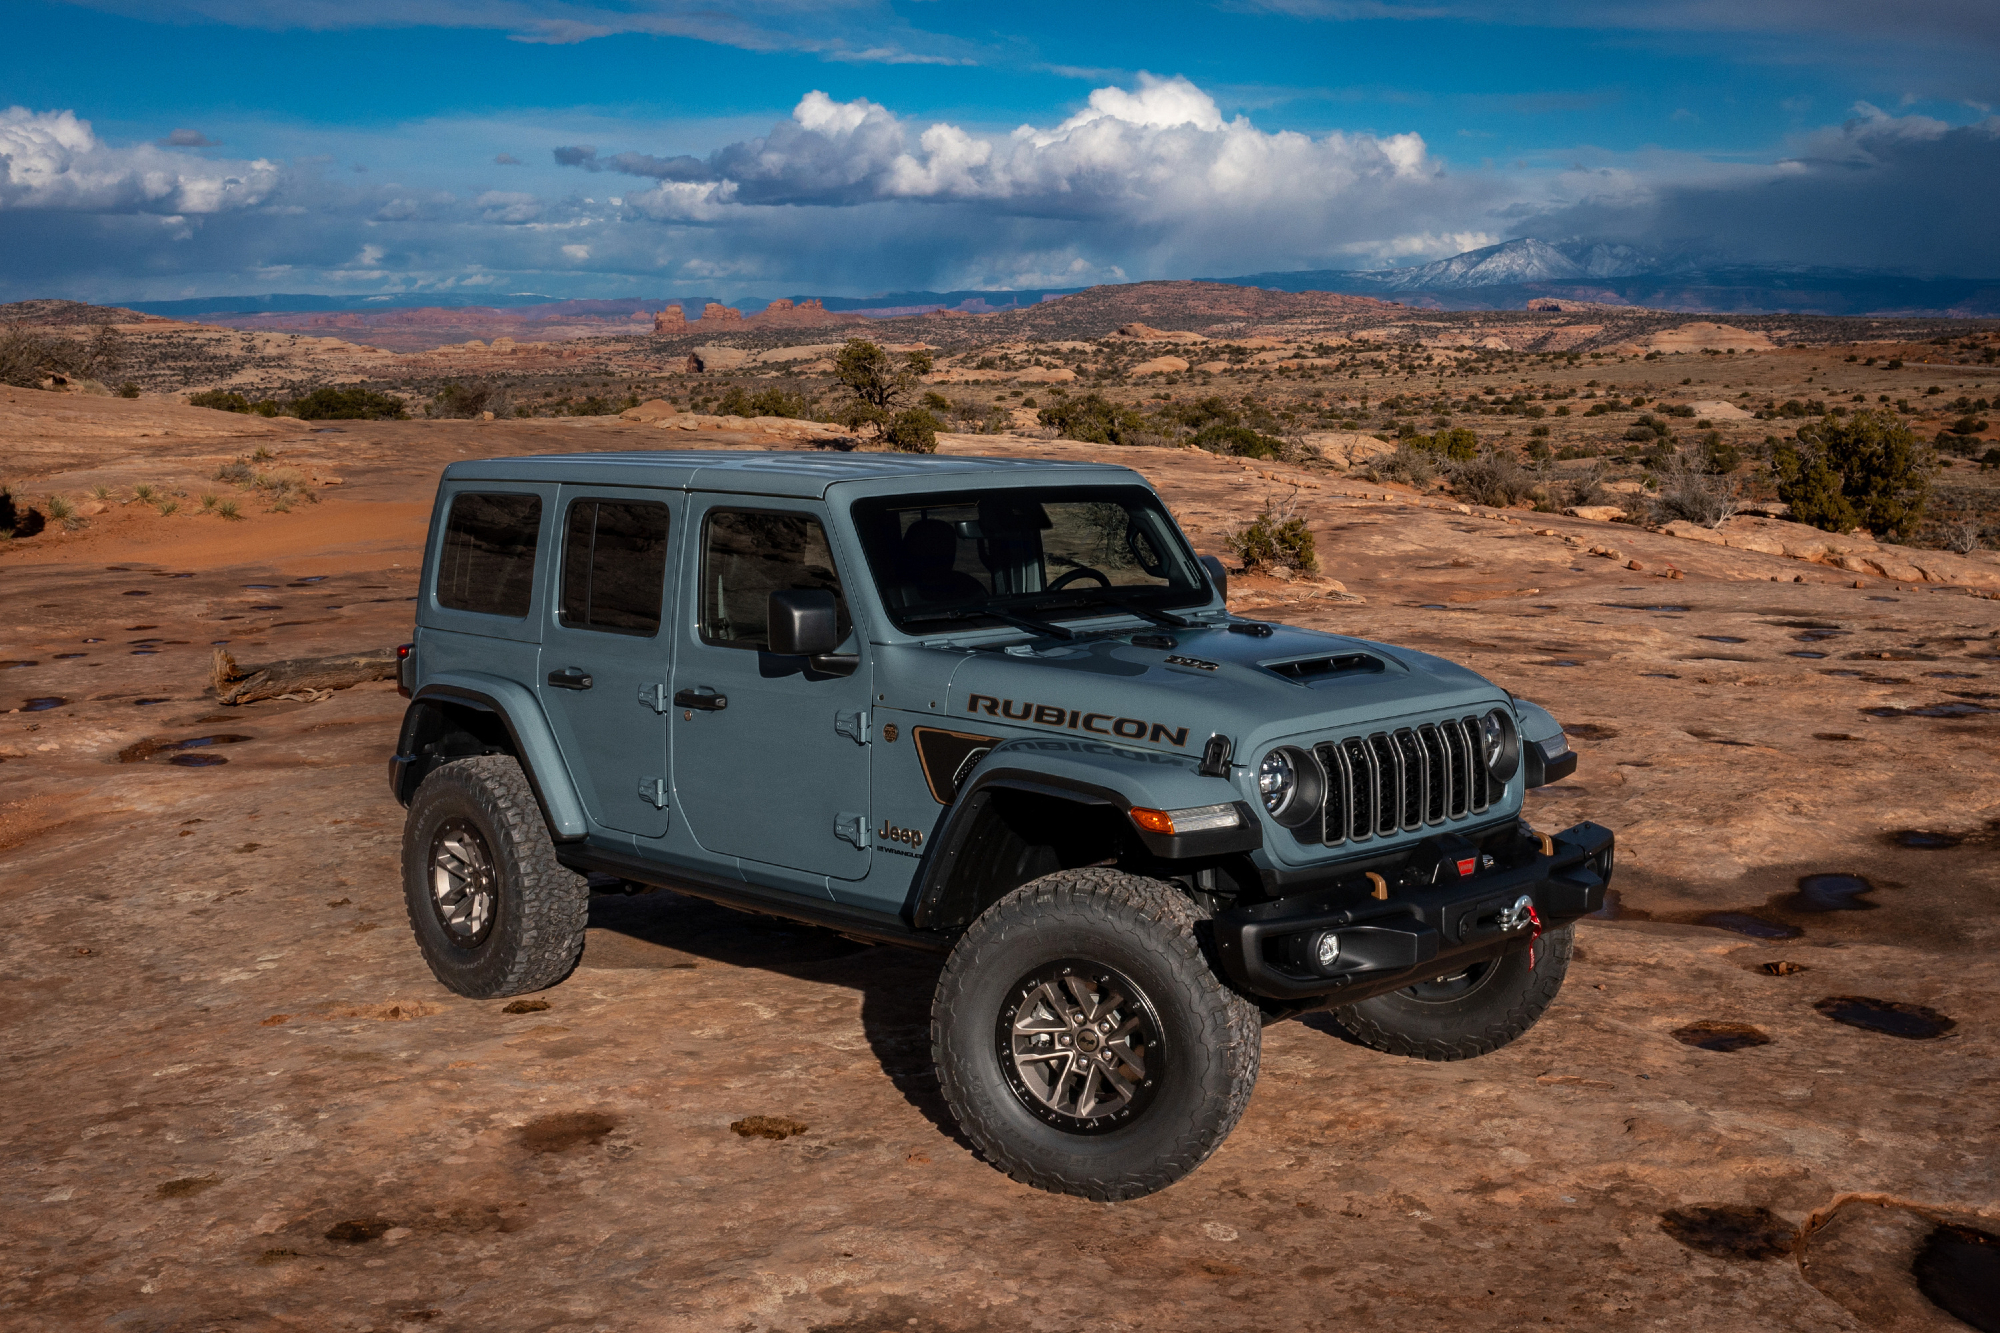 2025 Jeep Wranger 392 Final Edition parked in the desert with clouds in the background.